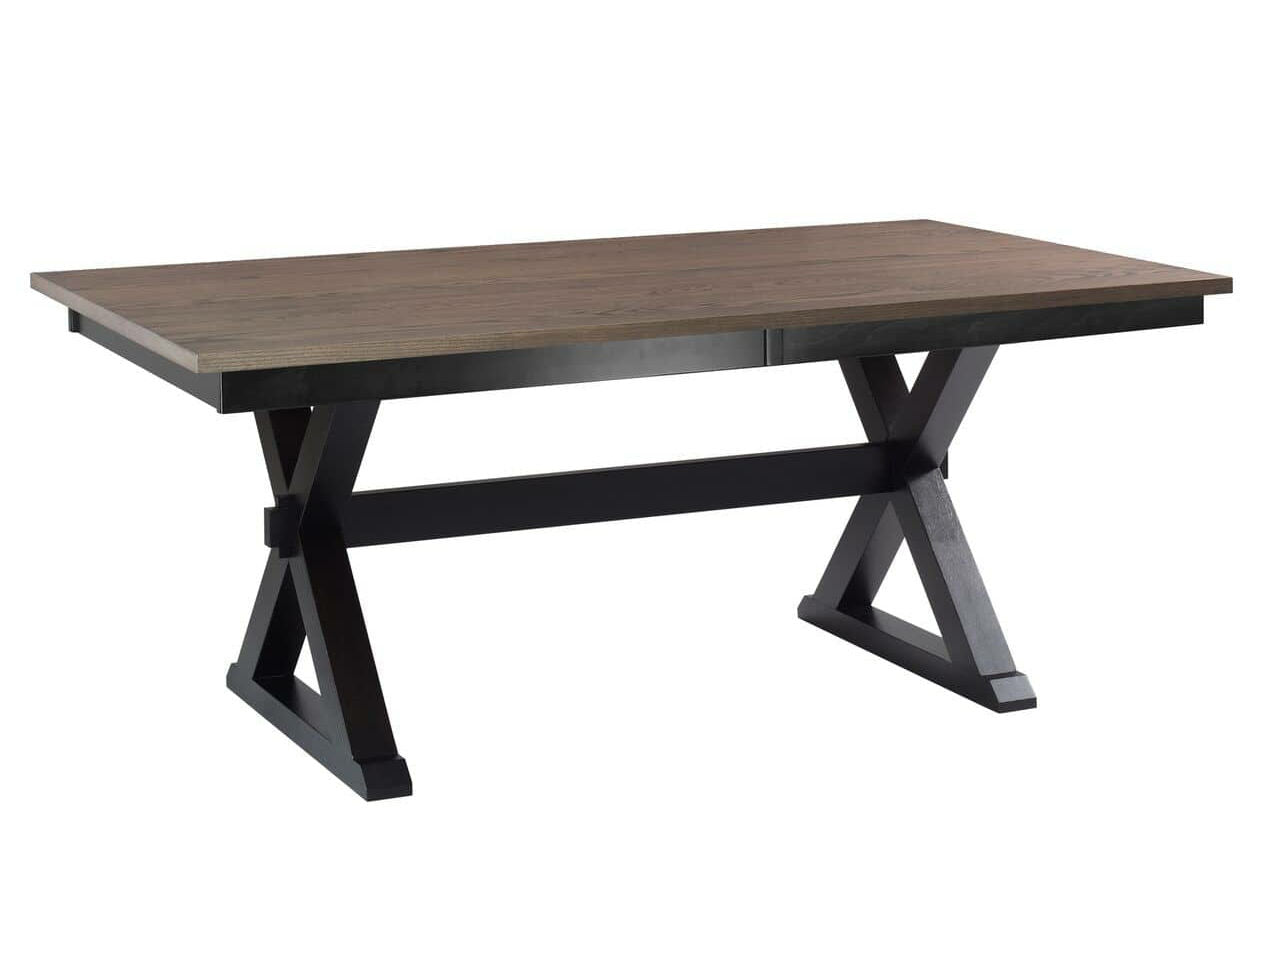 Chatham Trestle Table - snyders.furniture